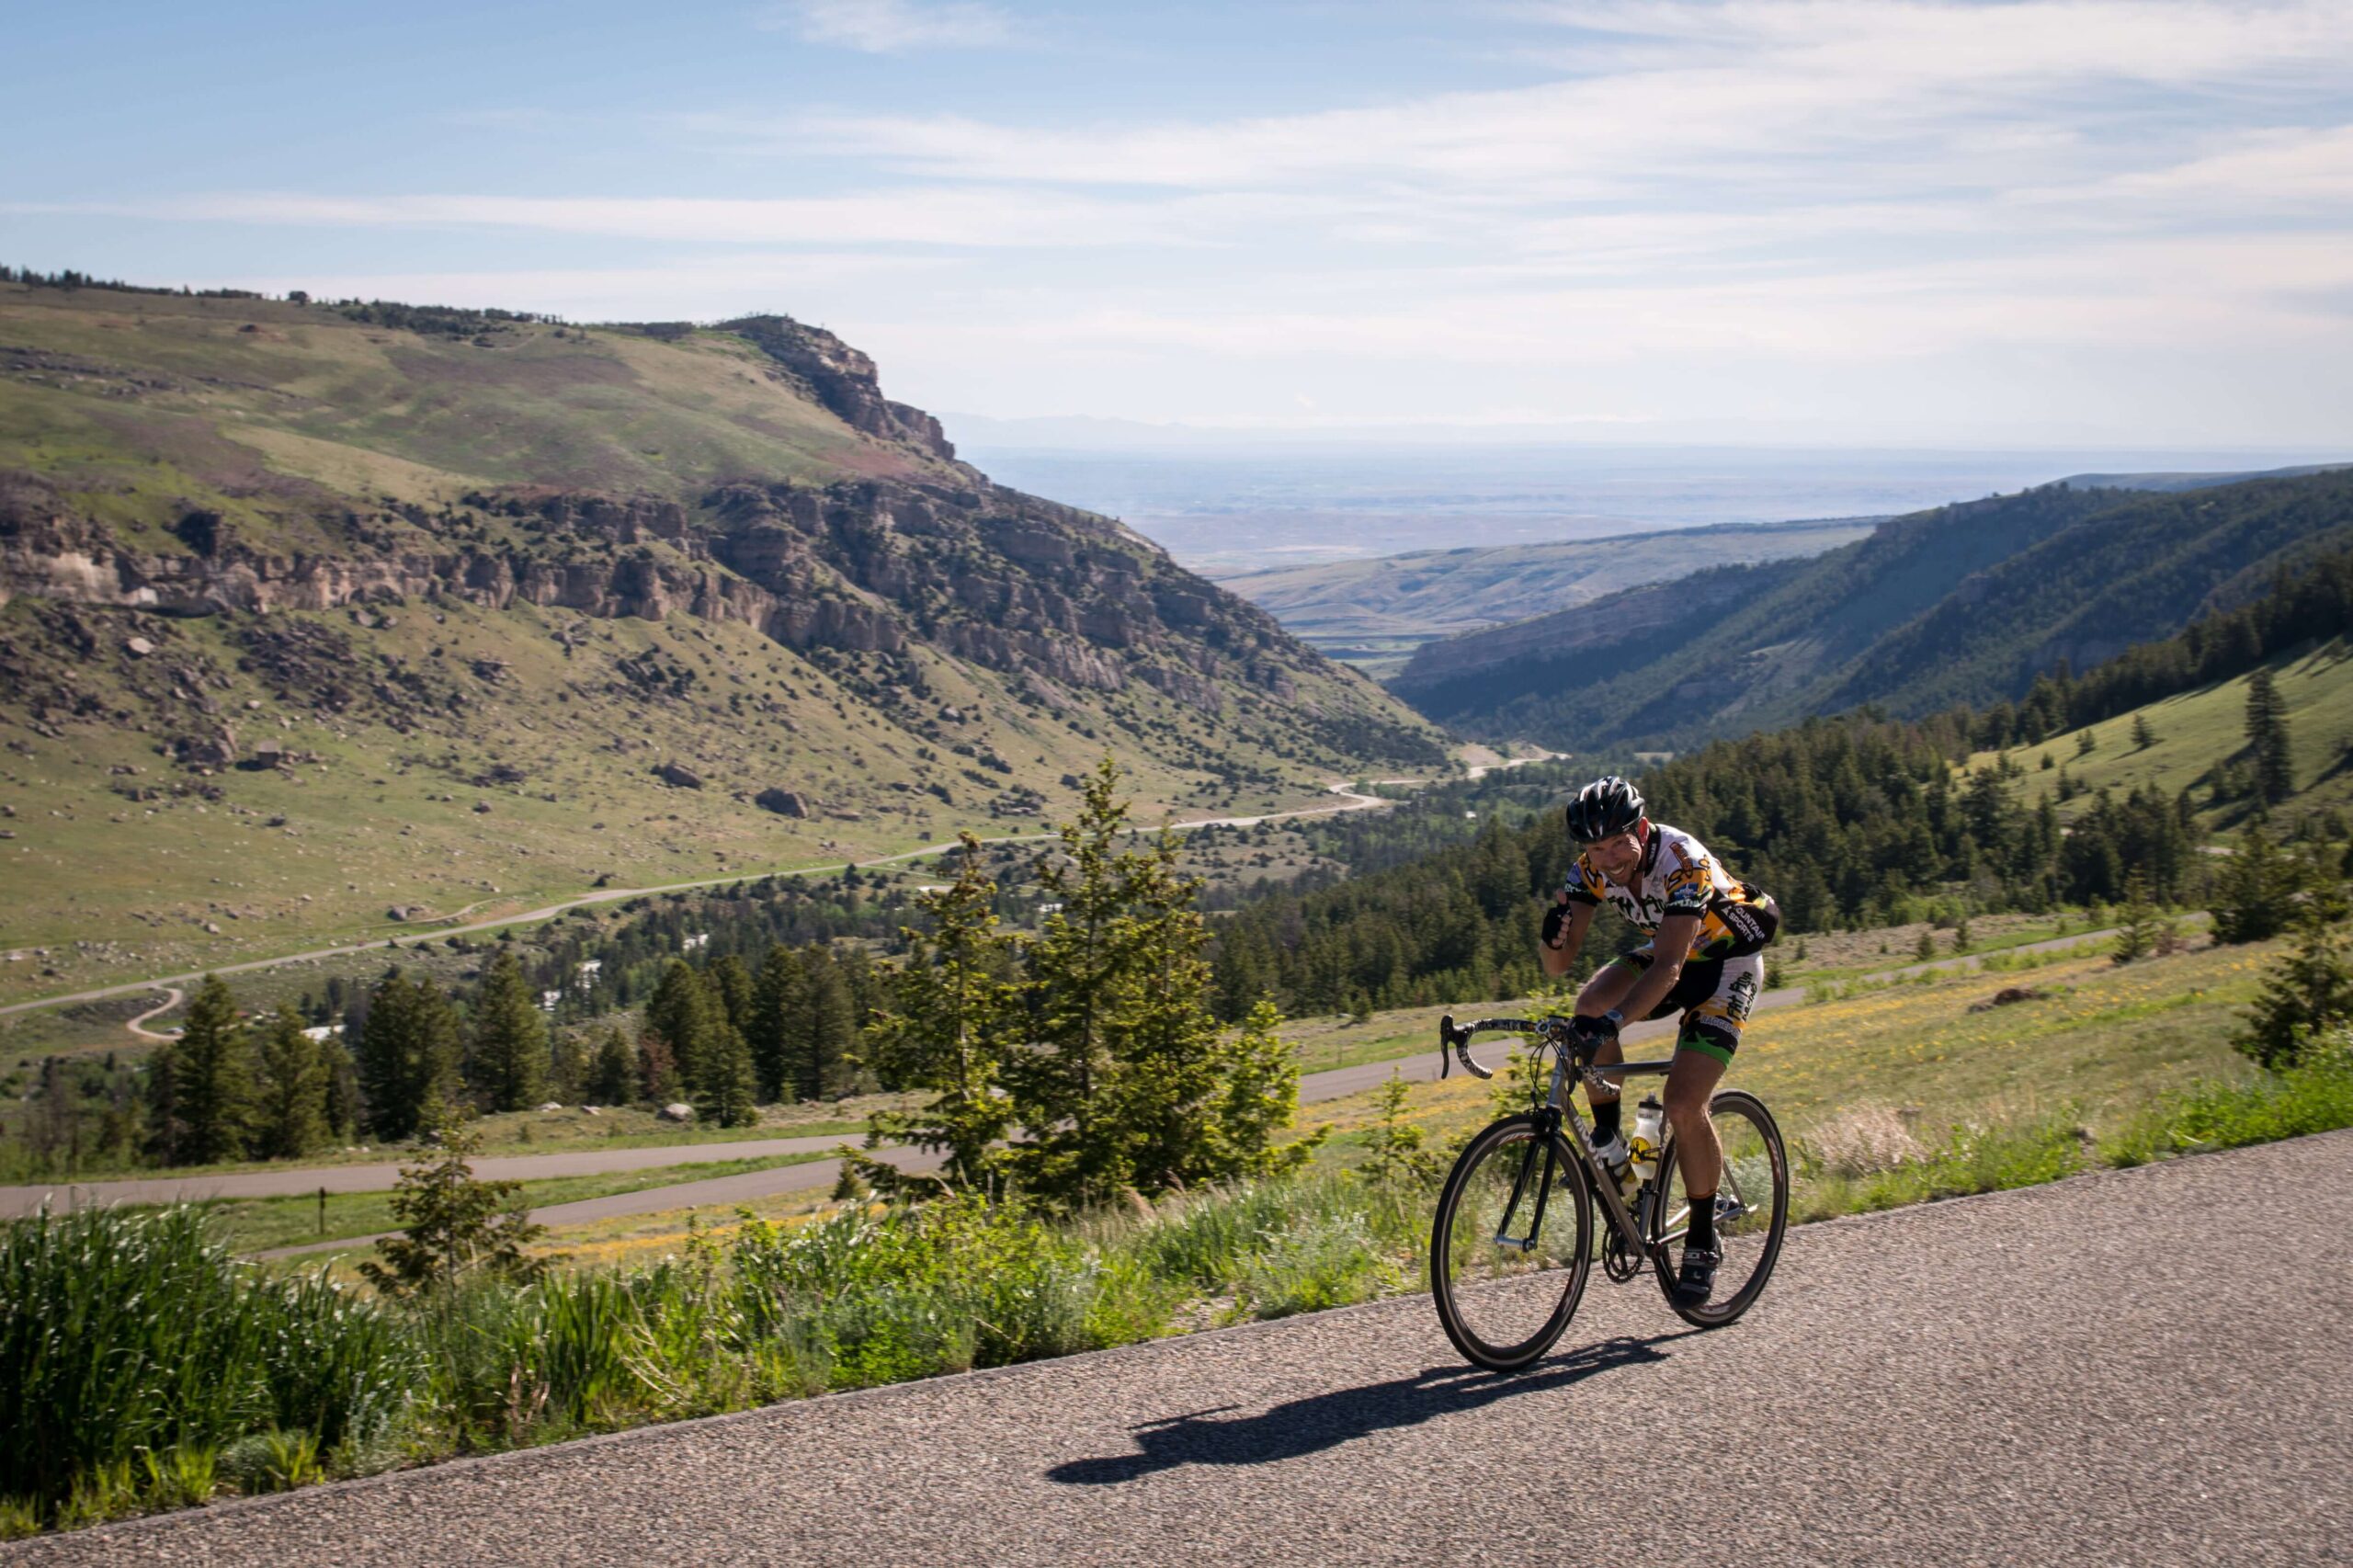 A cyclist in a yellow and black outfit vigorously pedals up a scenic mountain road, surrounded by lush greenery and dramatic rock formations, under a clear blue sky.